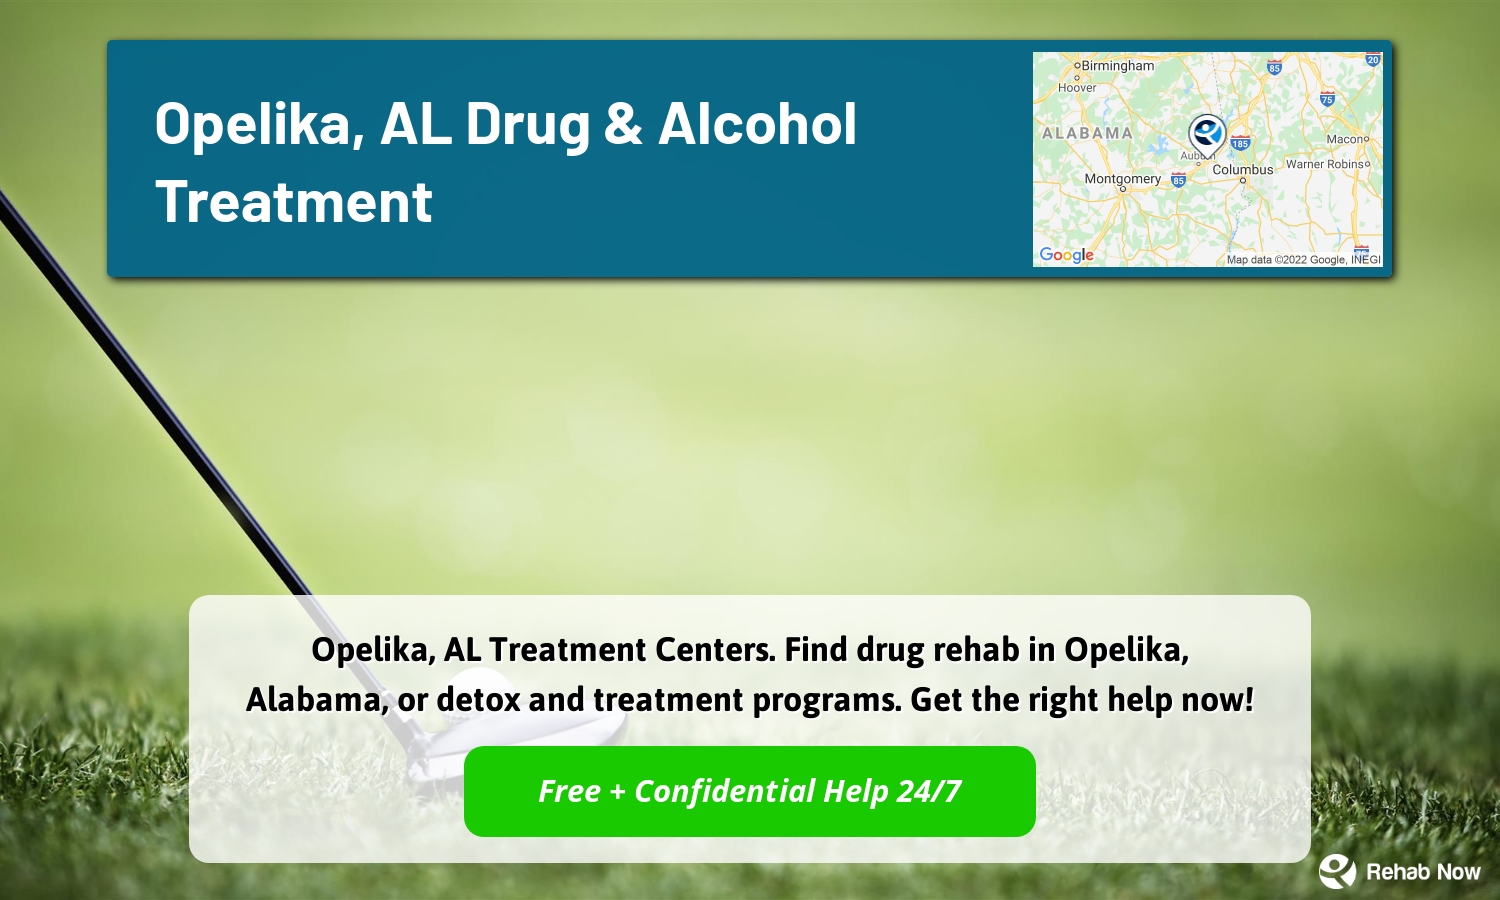 Opelika, AL Treatment Centers. Find drug rehab in Opelika, Alabama, or detox and treatment programs. Get the right help now!